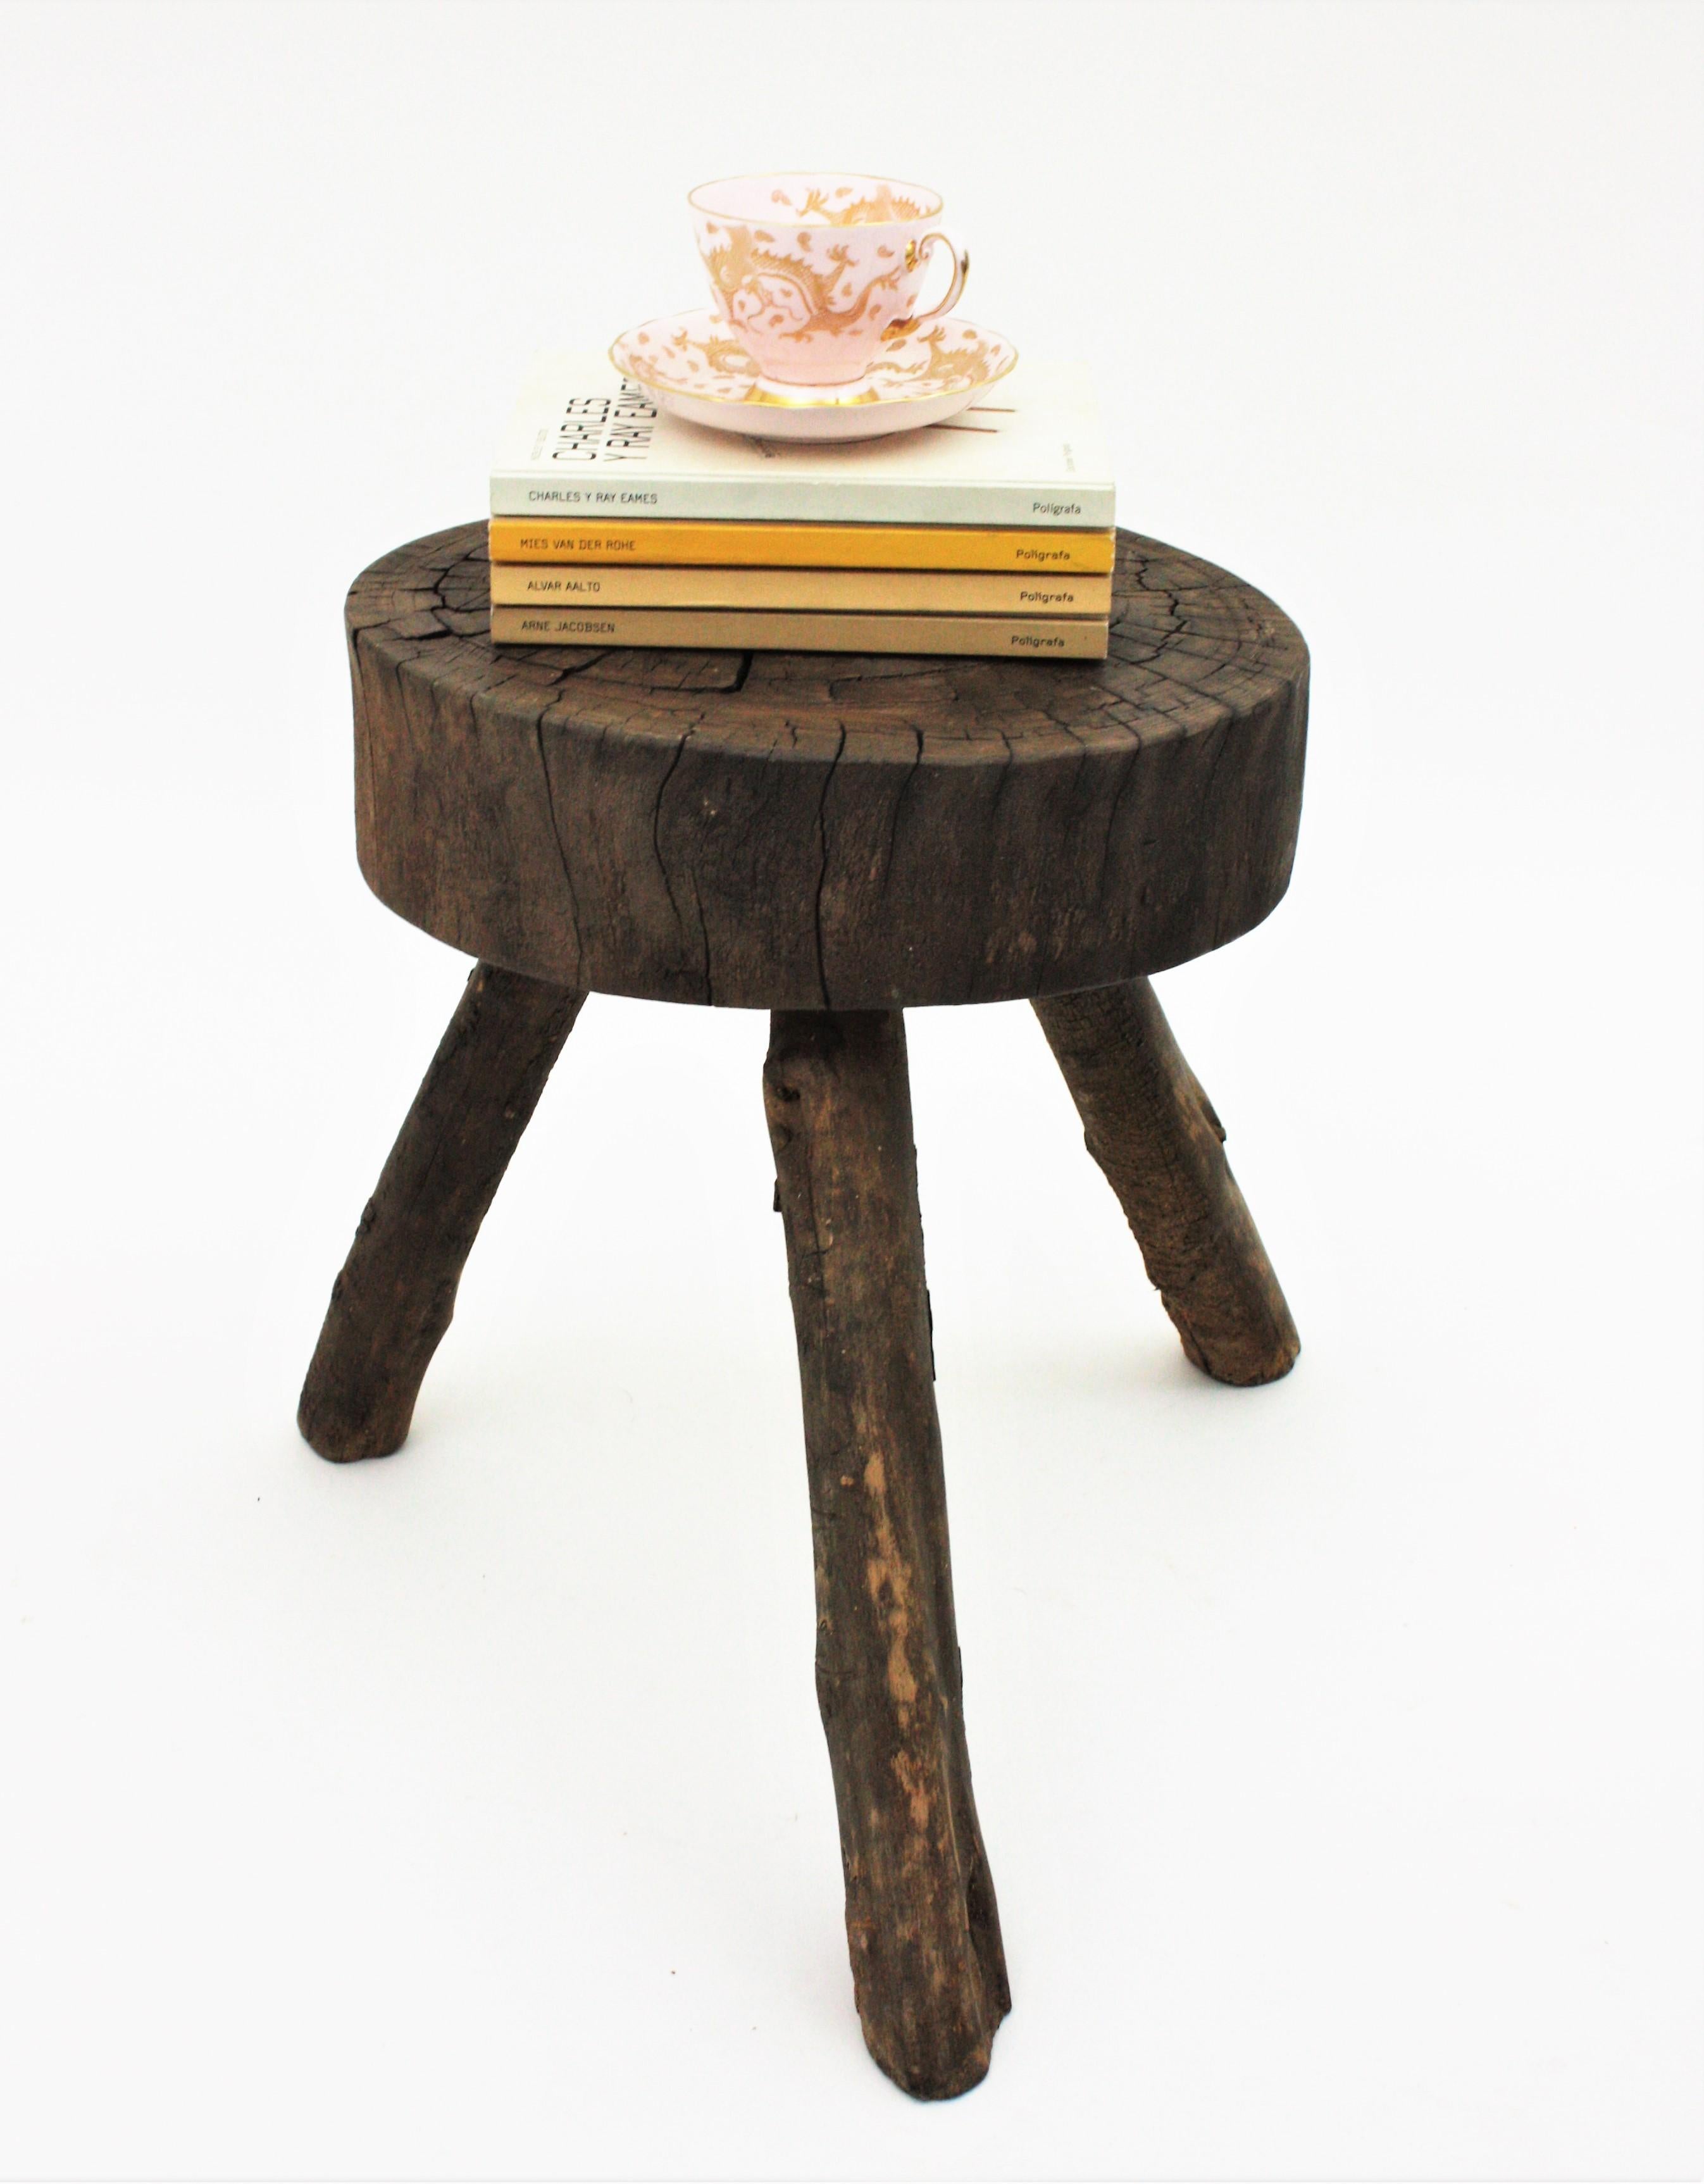 Pair of Spanish Rustic Wood Tripod Side Table / Stools, 1940s For Sale 1